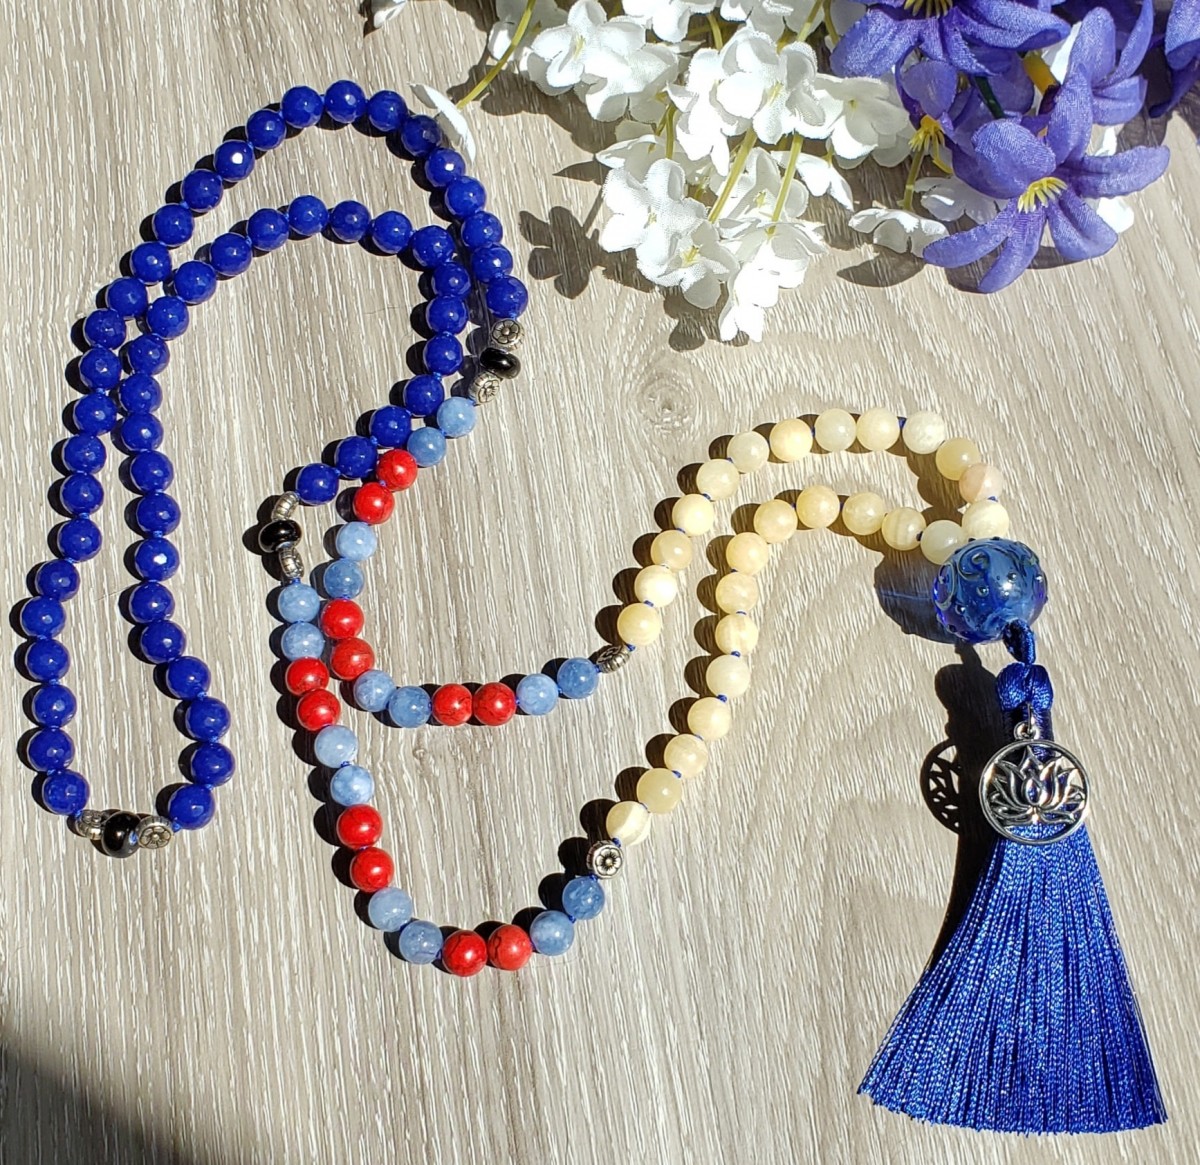 Gold 3 Layer Blue White Bead Necklace Set